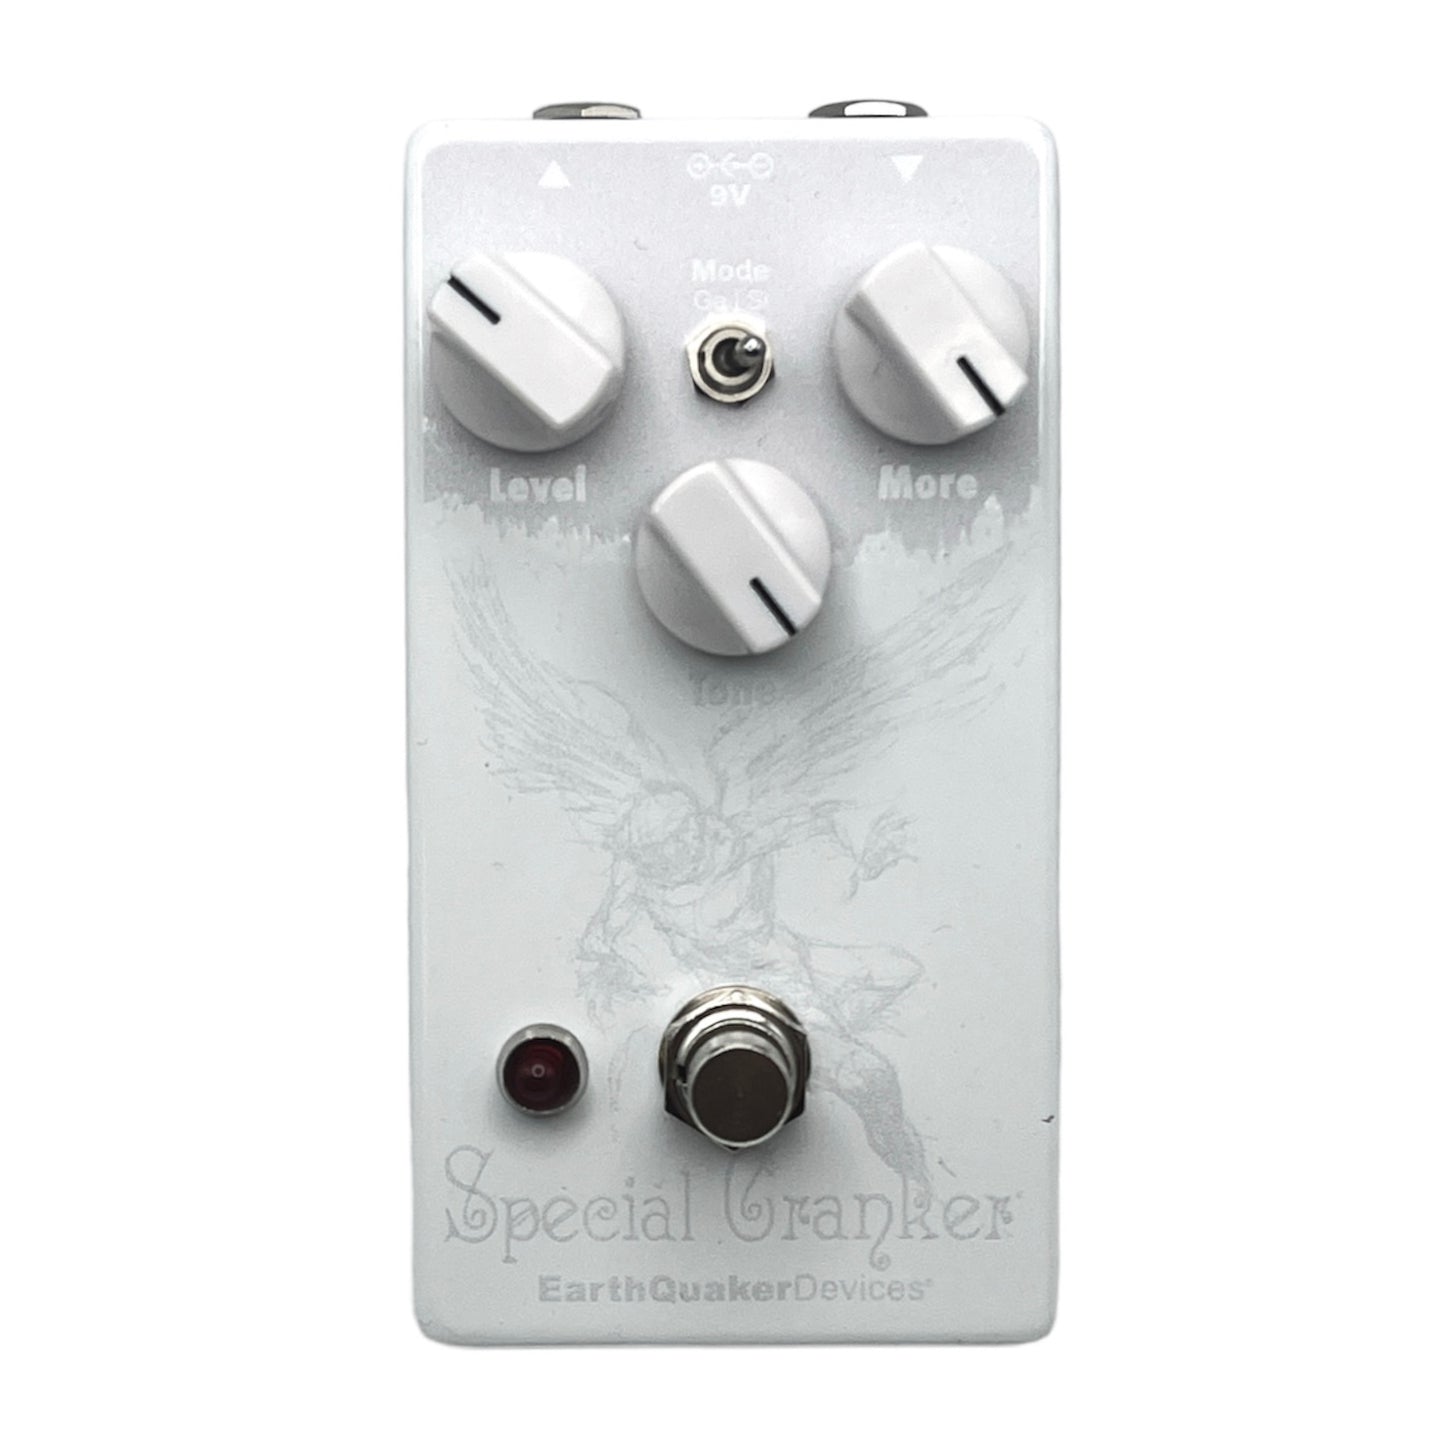 ROCK HALL X EARTHQUAKER DEVICES - LIMITED EDITION WHITE SPECIAL CRANKER PEDAL